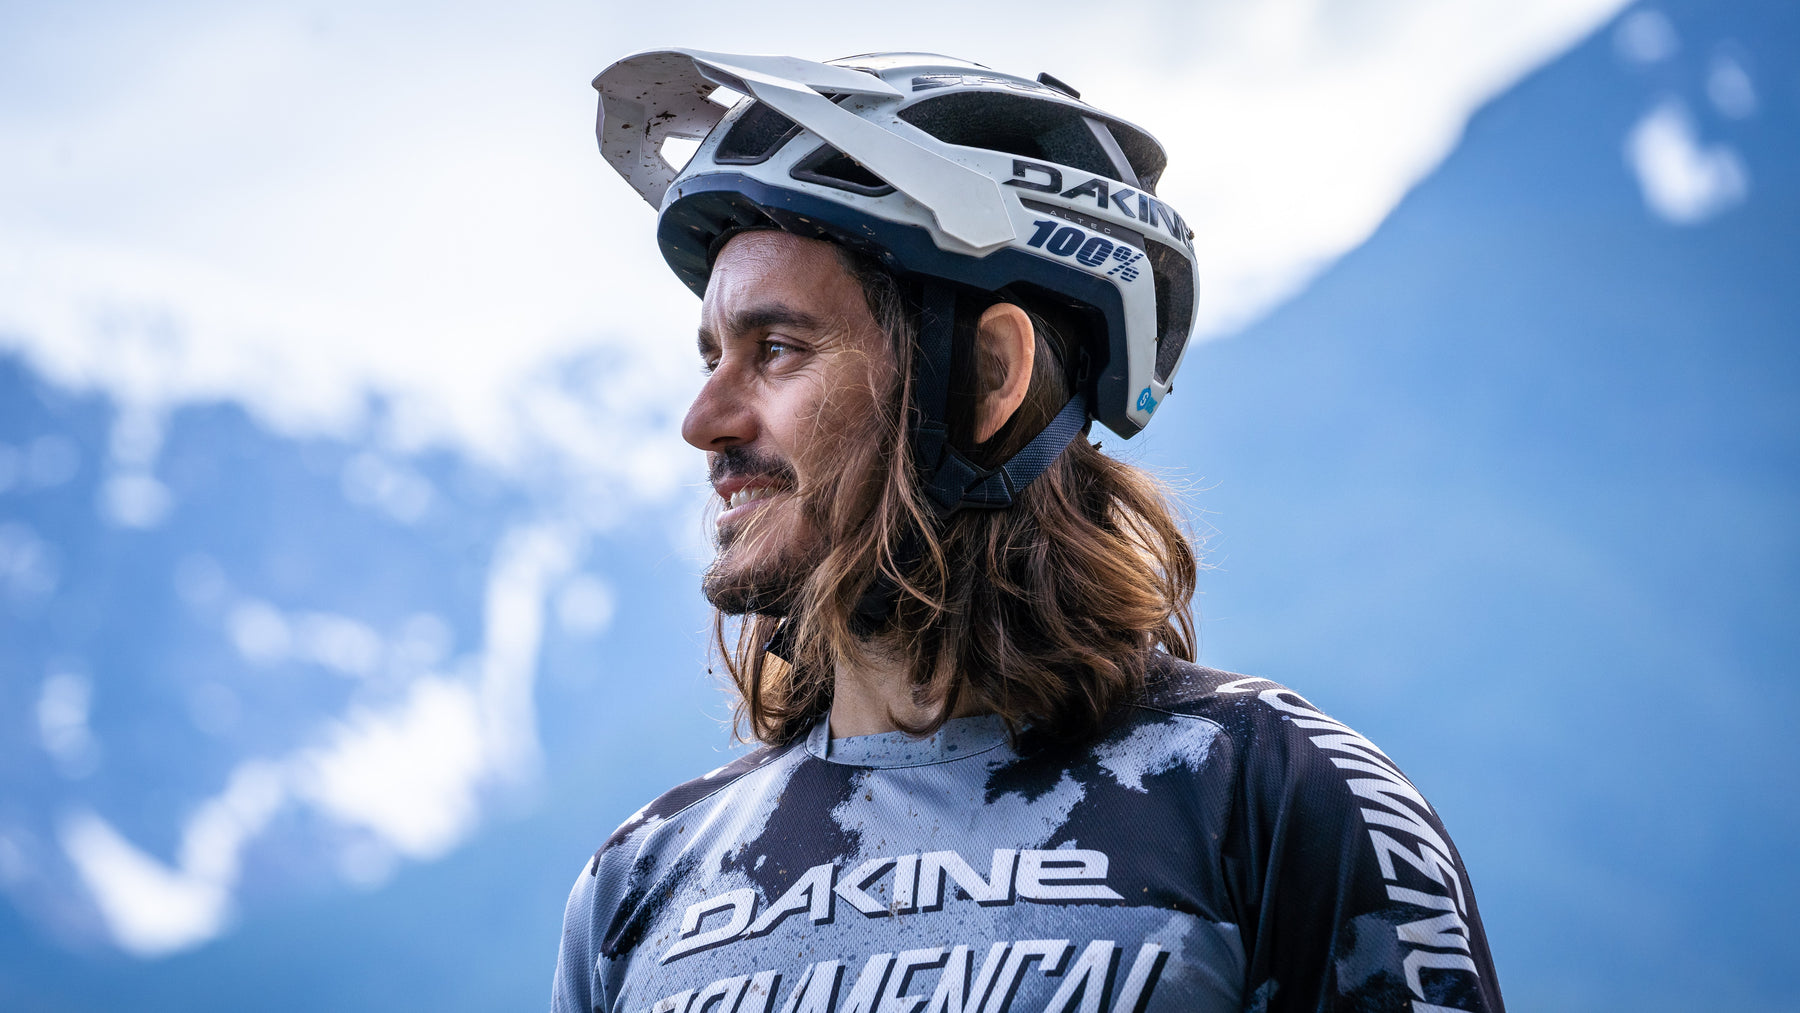 Yoann Barelli, professional mountain biker. Image of him in riding gear with mountains in the backdrop